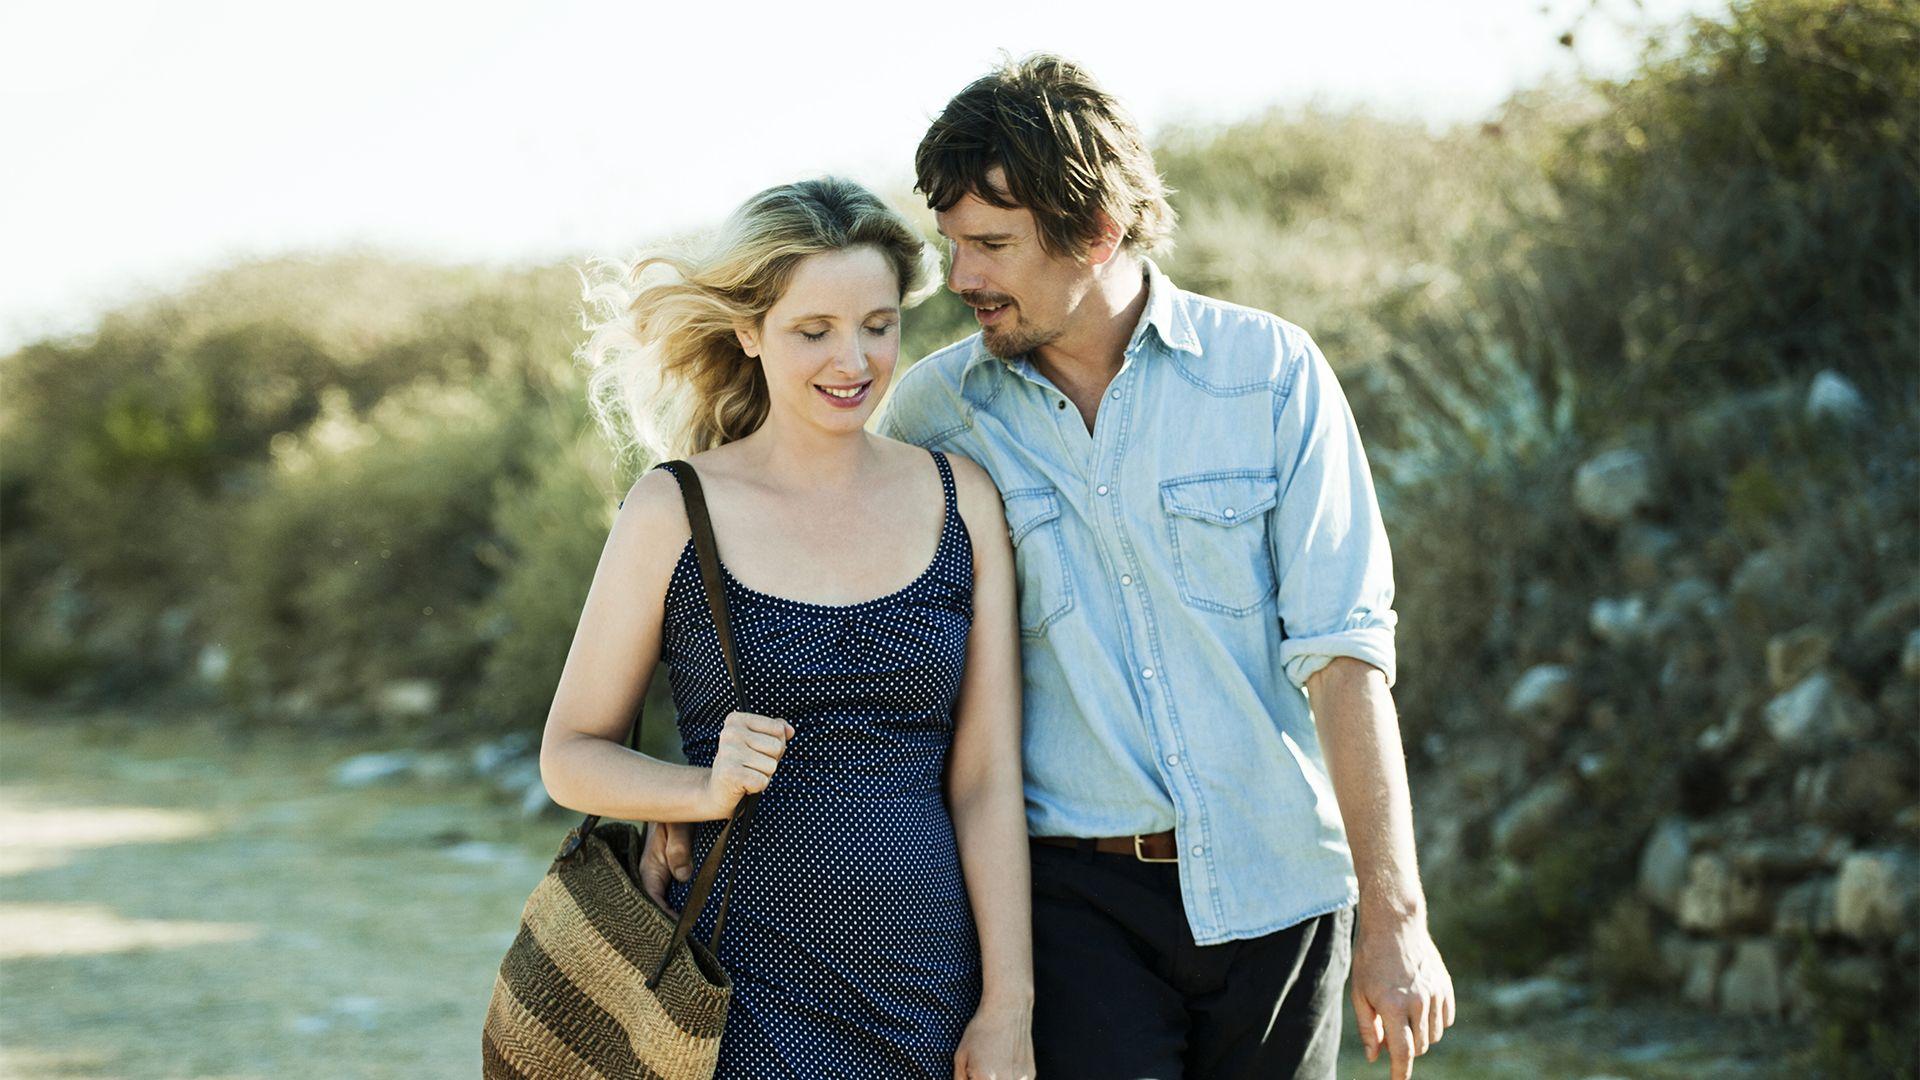 Before midnight HD Wallpaper, Background Image